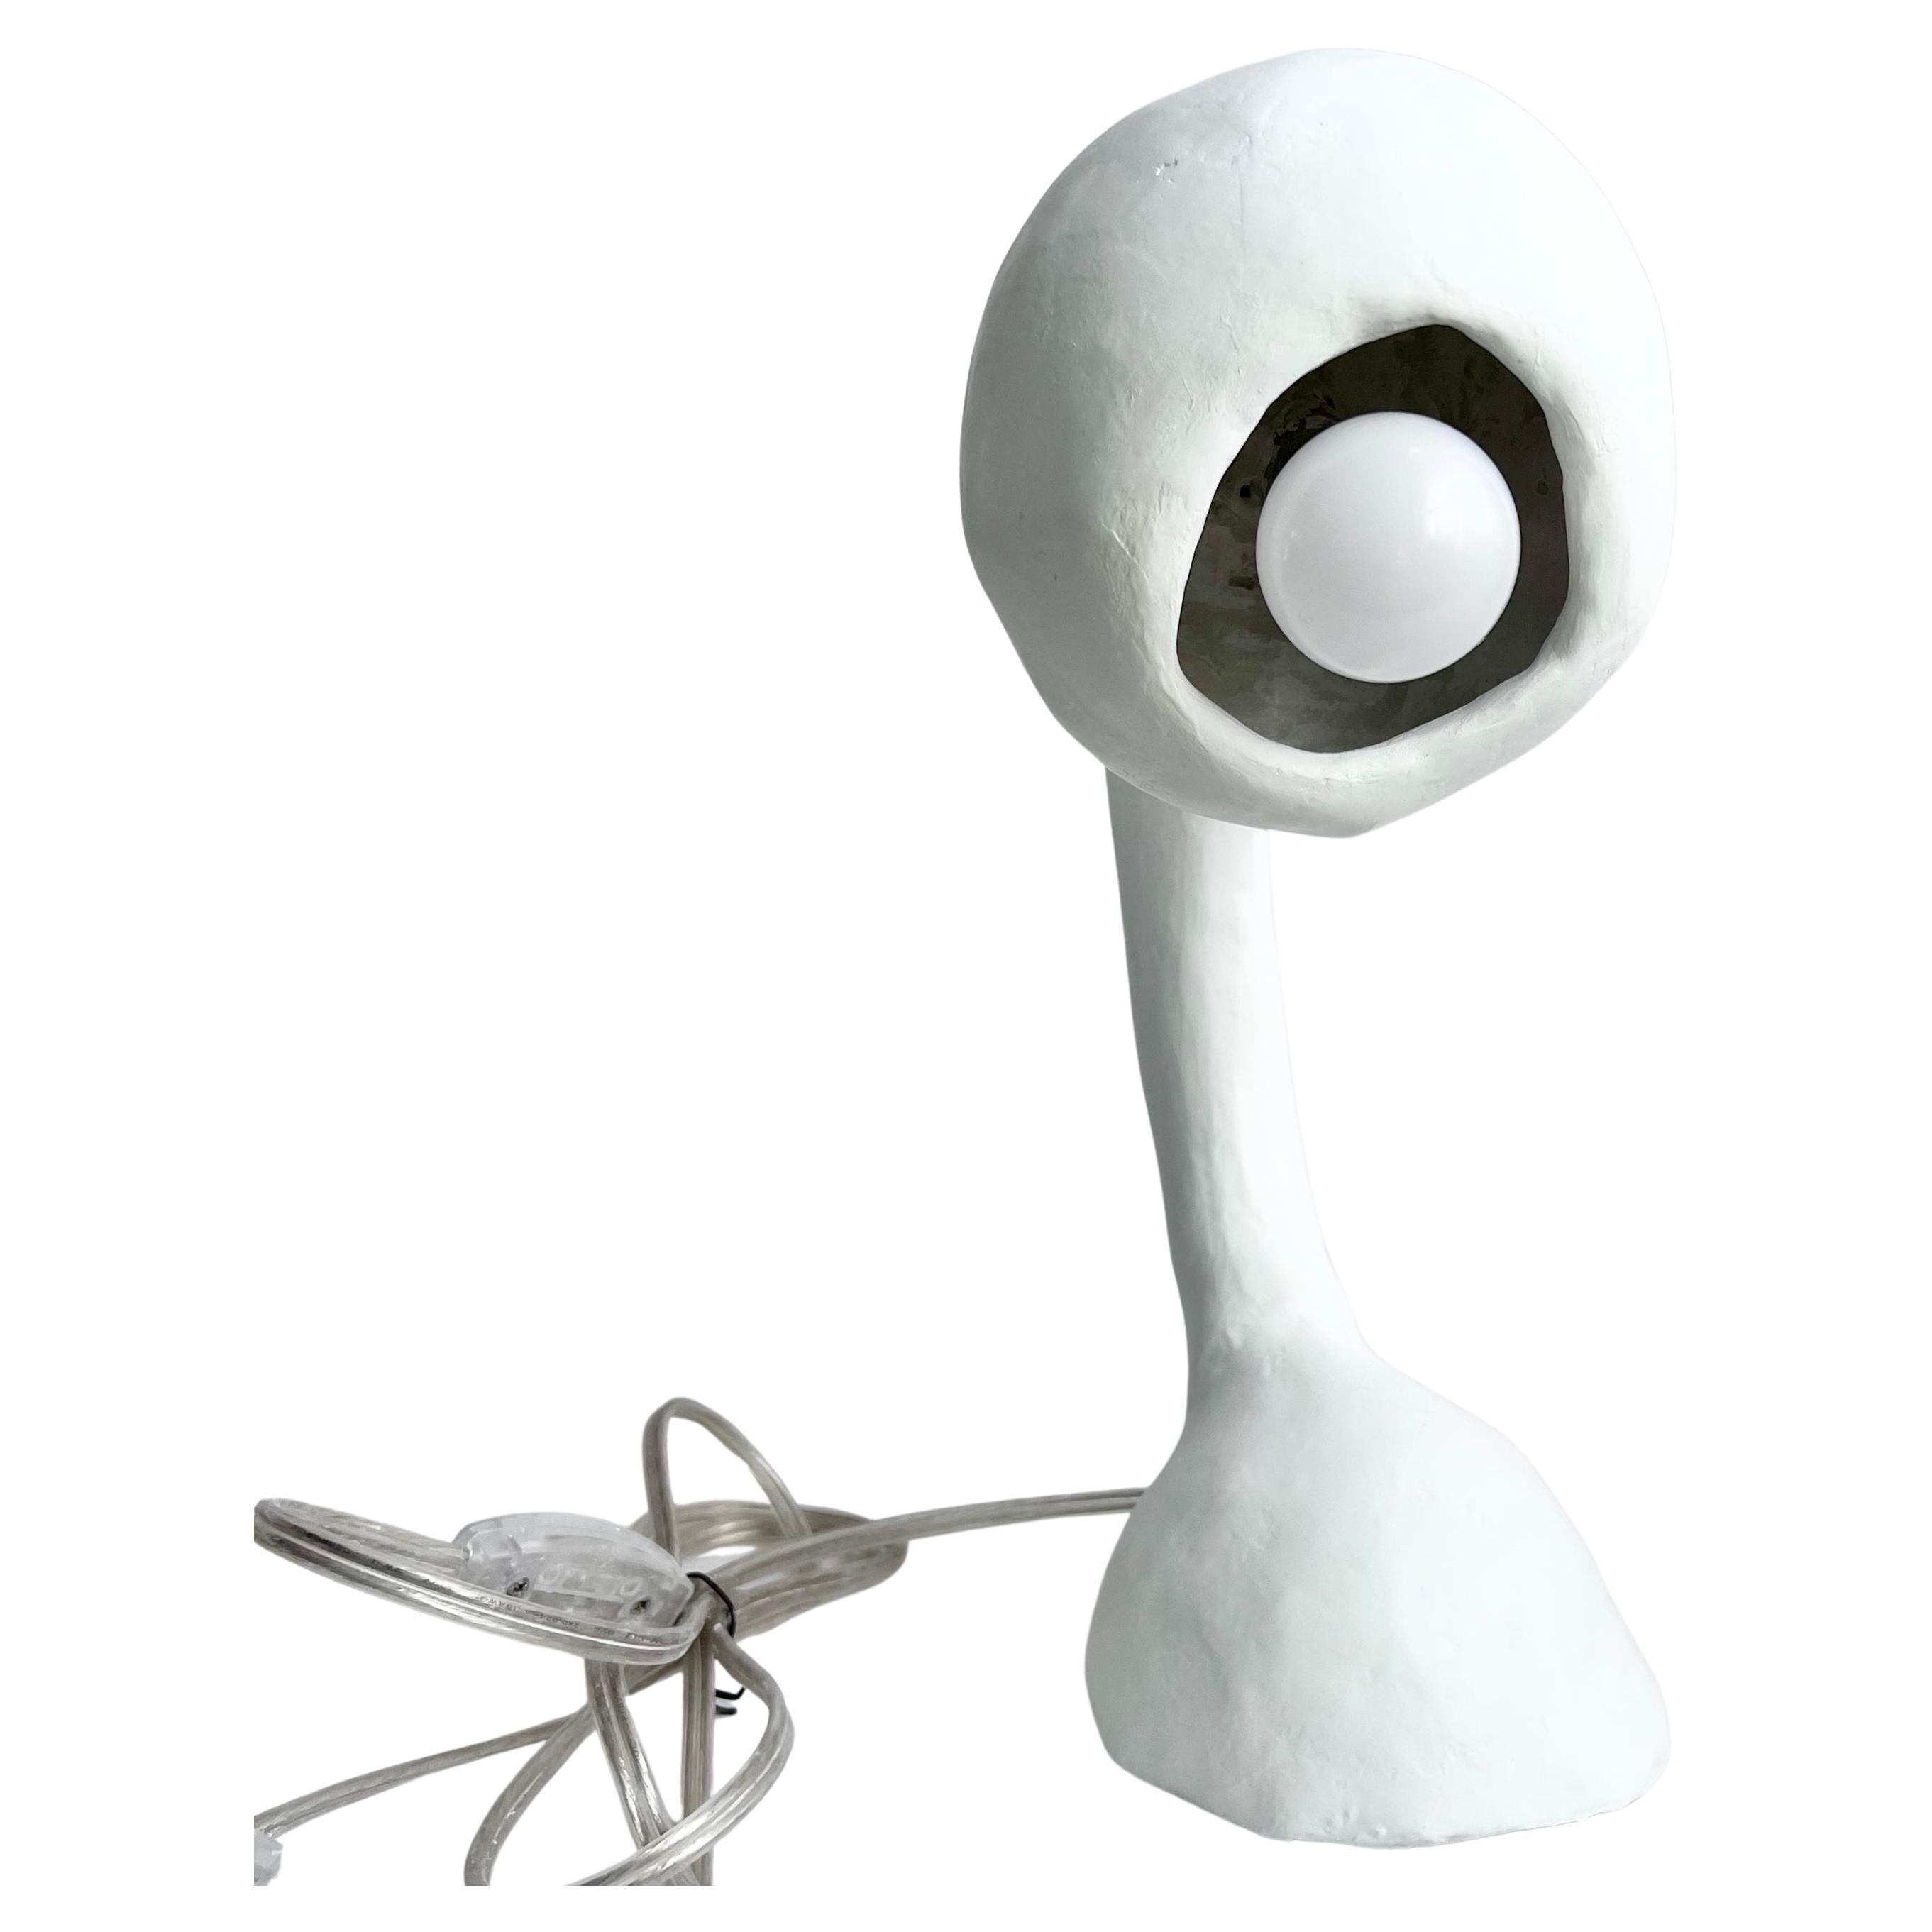 Contemporary Biomorphic Line by Studio Chora, Task Table Lamp, White Lime Plaster, In Stock